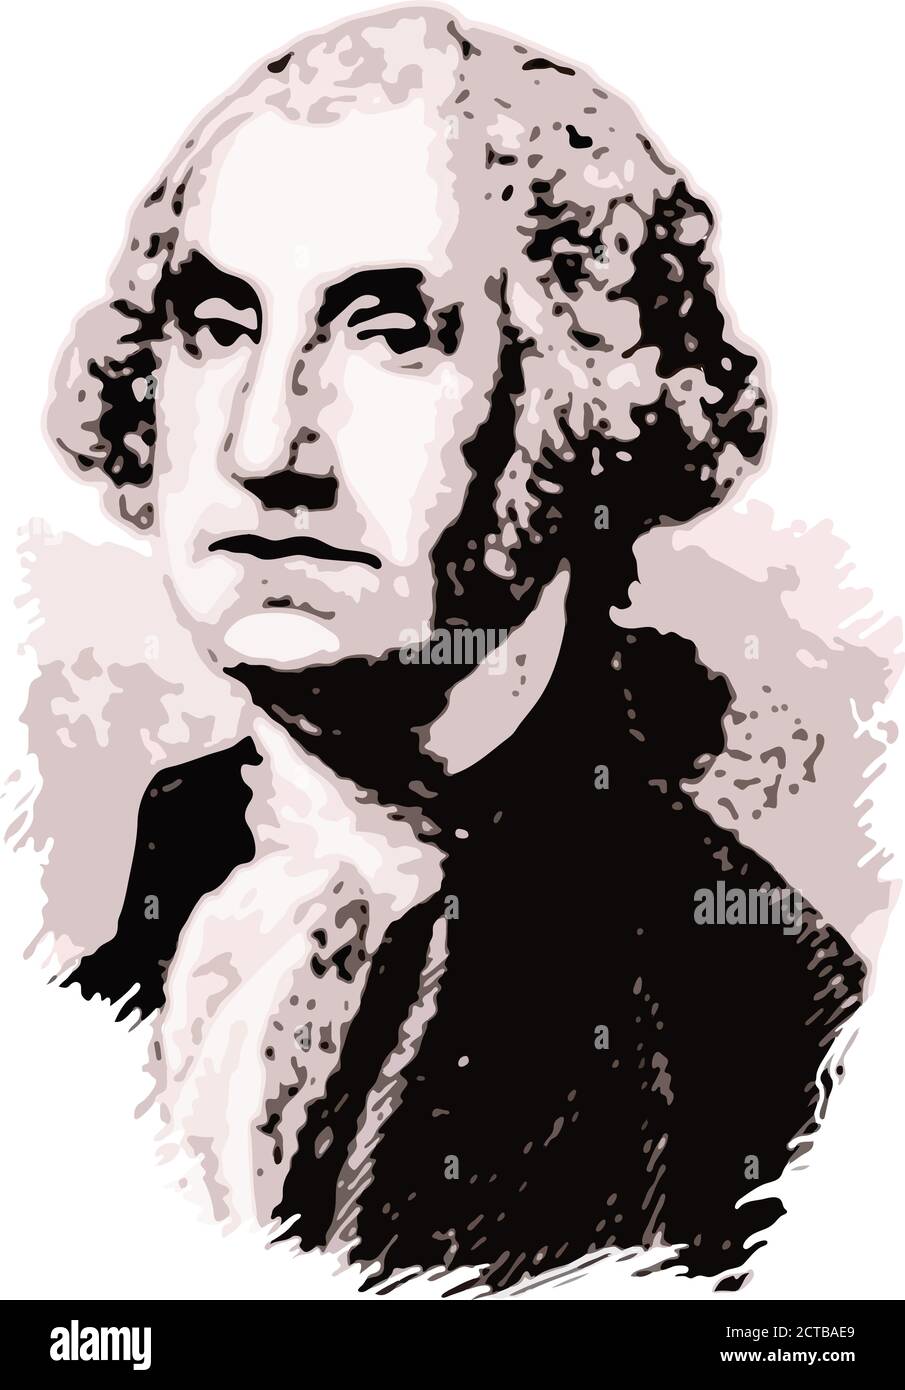 Vector portrait of president George Washington. George Washington (1732 – 1799) was an American political leader, military general, statesman, and fou Stock Vector